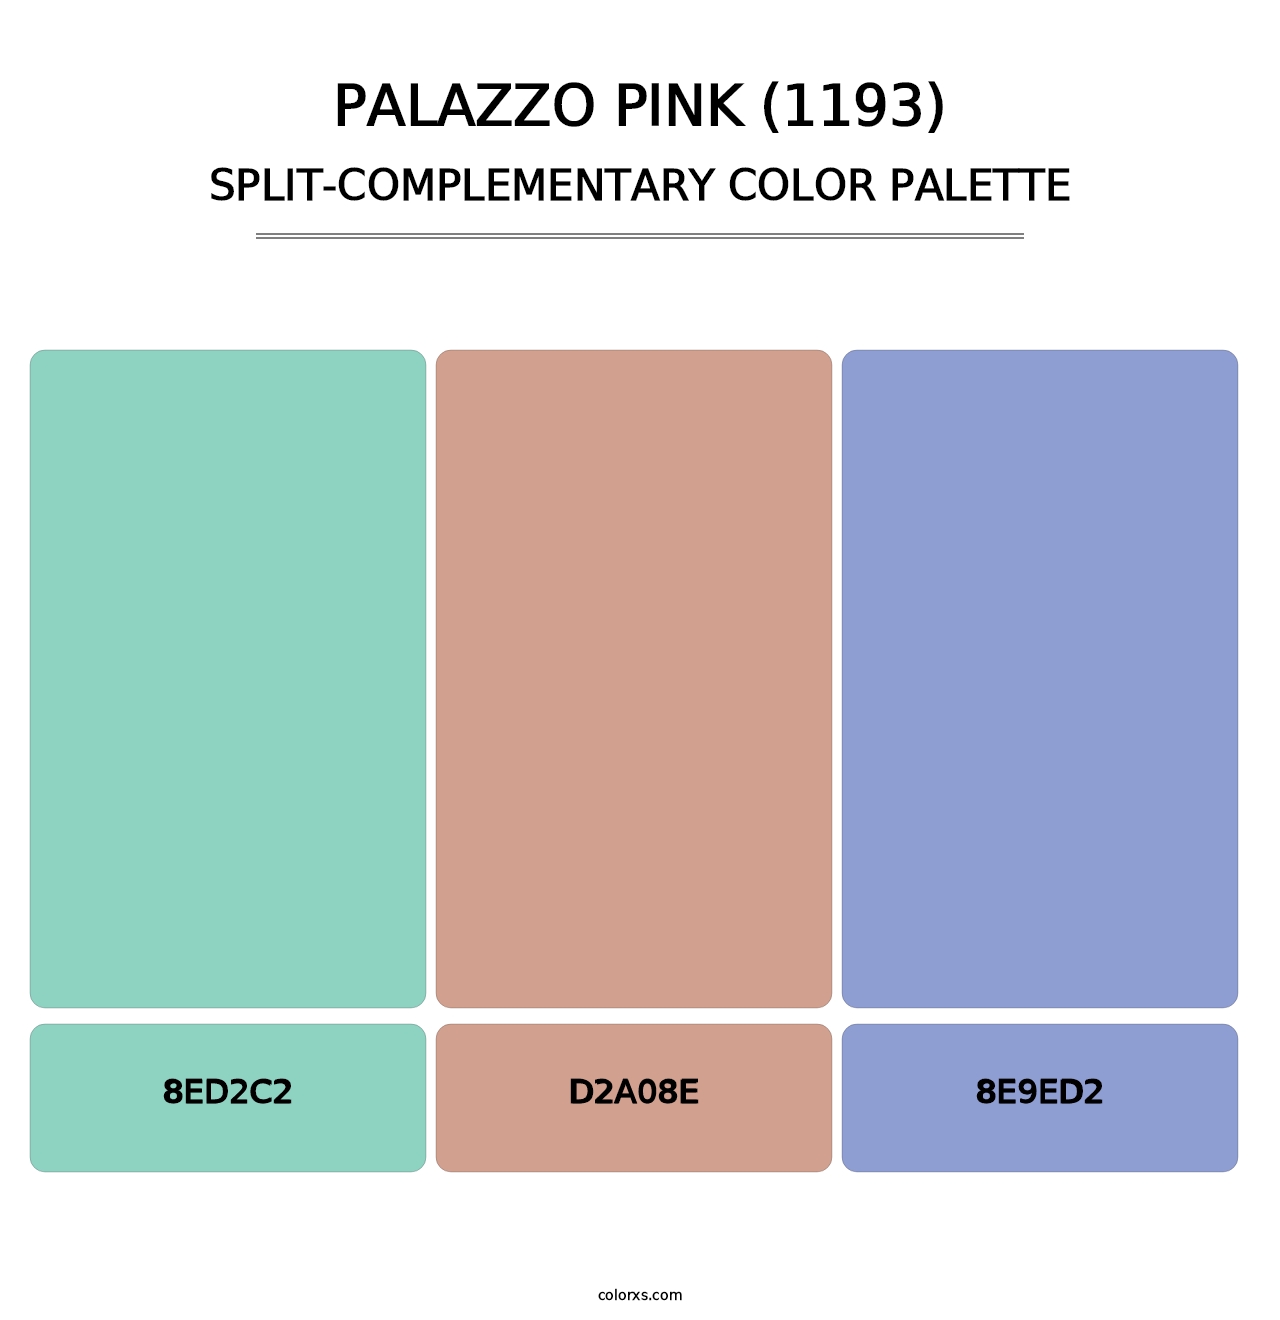 Palazzo Pink (1193) - Split-Complementary Color Palette